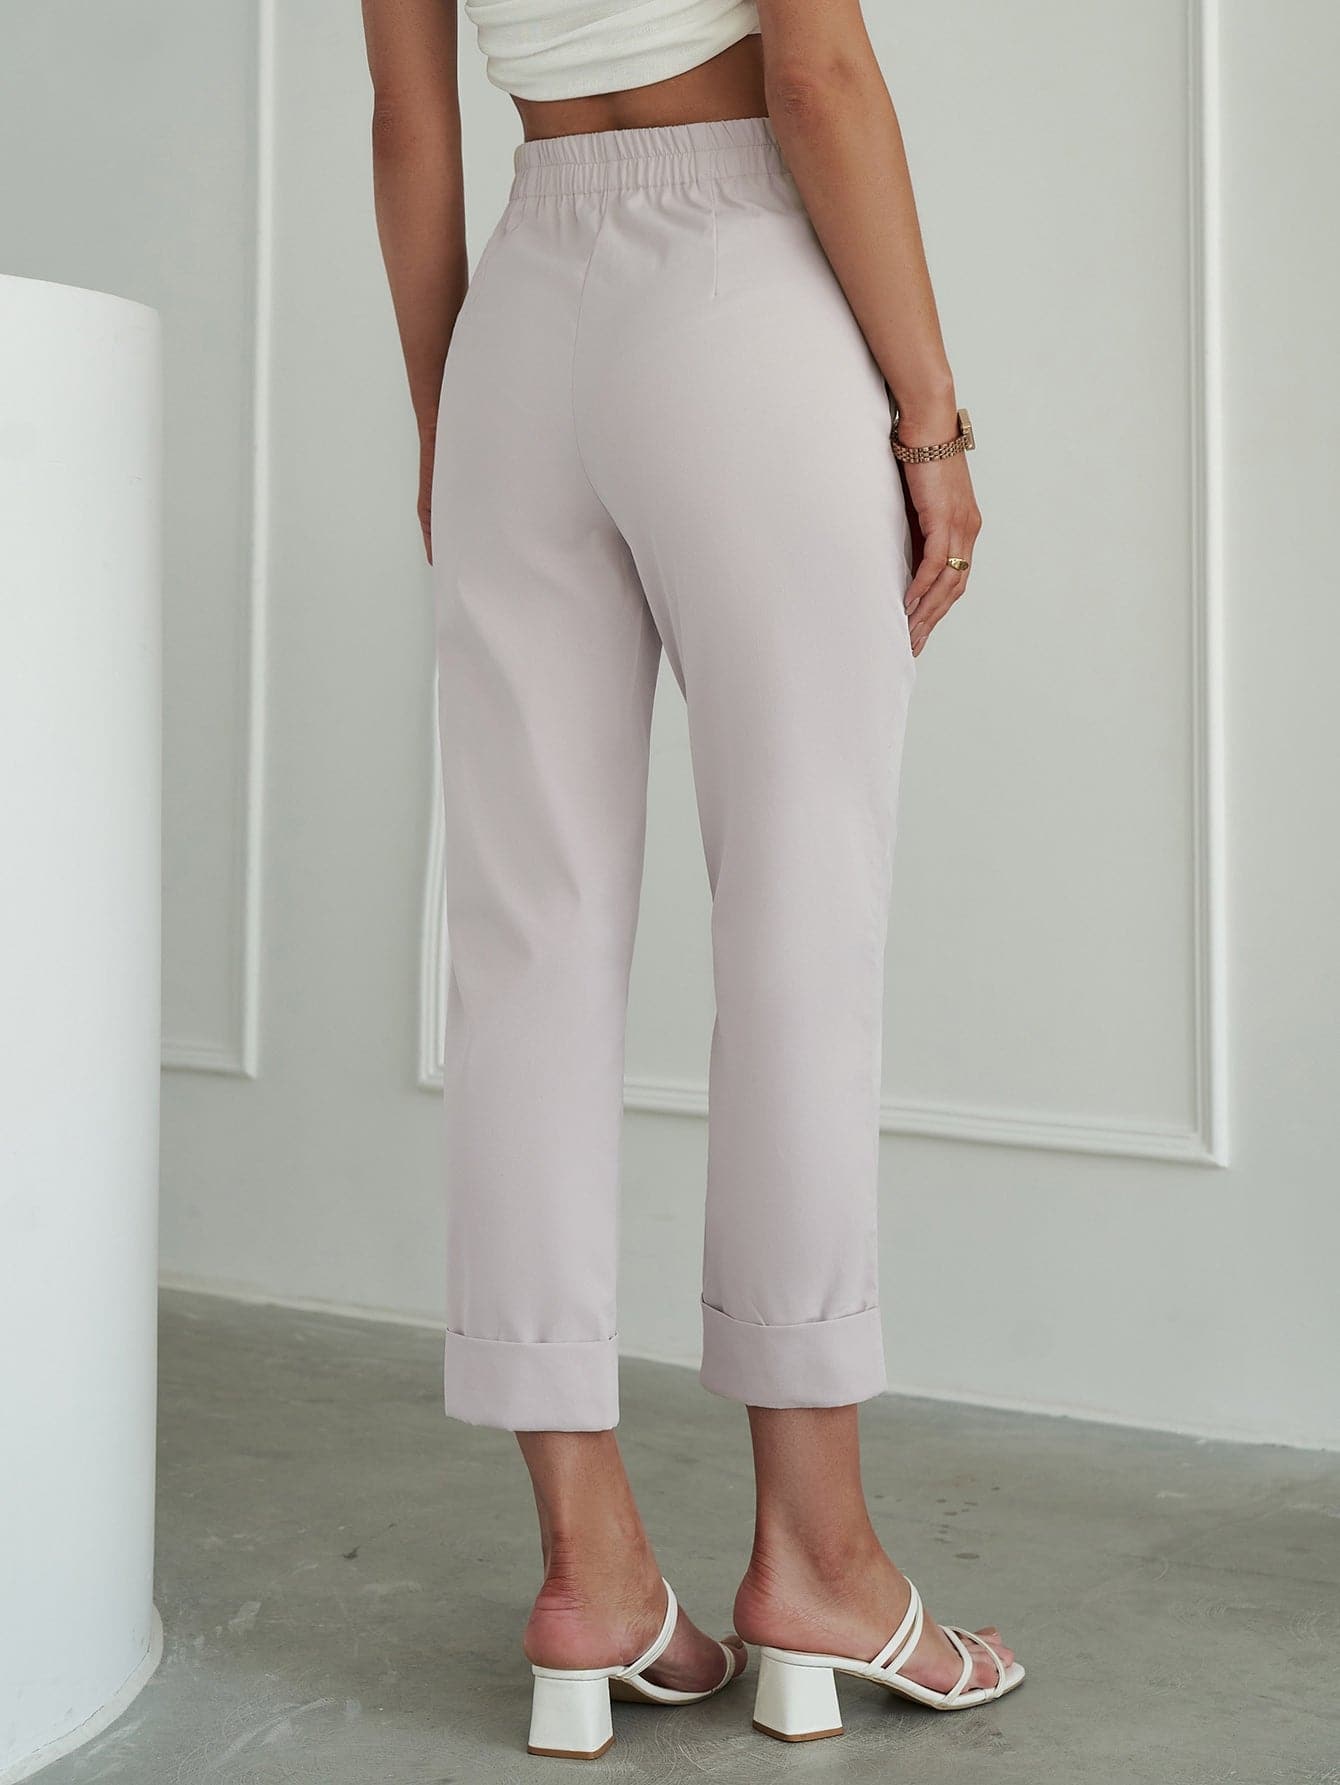 Buttoned Elastic Detail Cuffed Pants - Love culture store